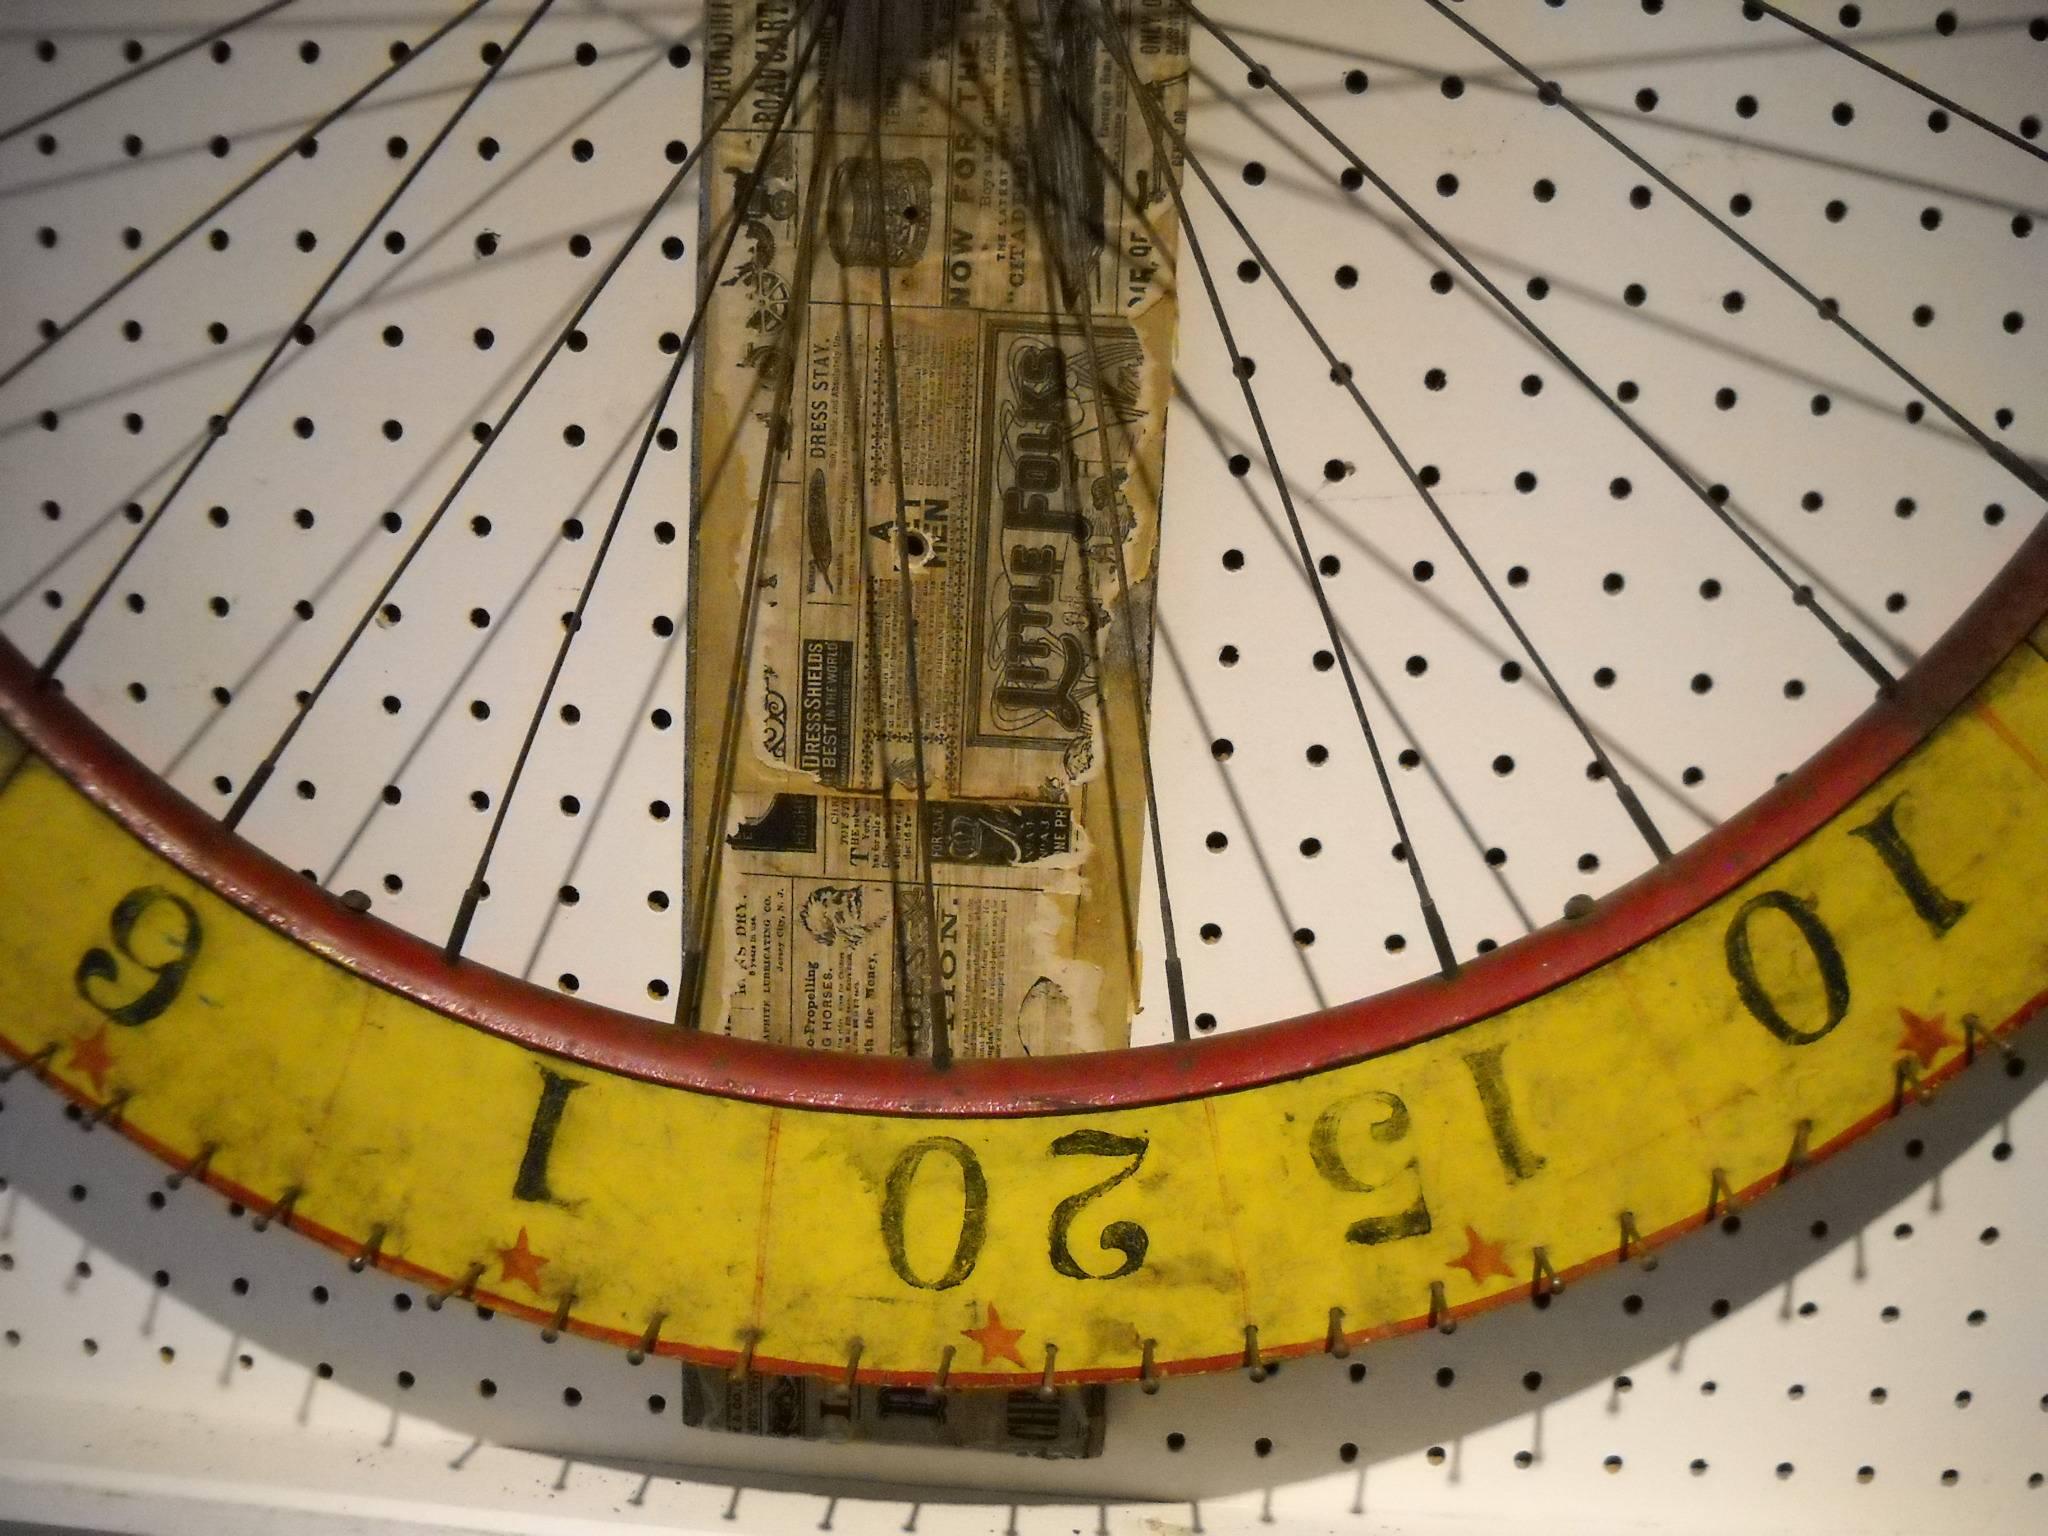 American Carnival Game Wheel made from a Bicycle Wheel